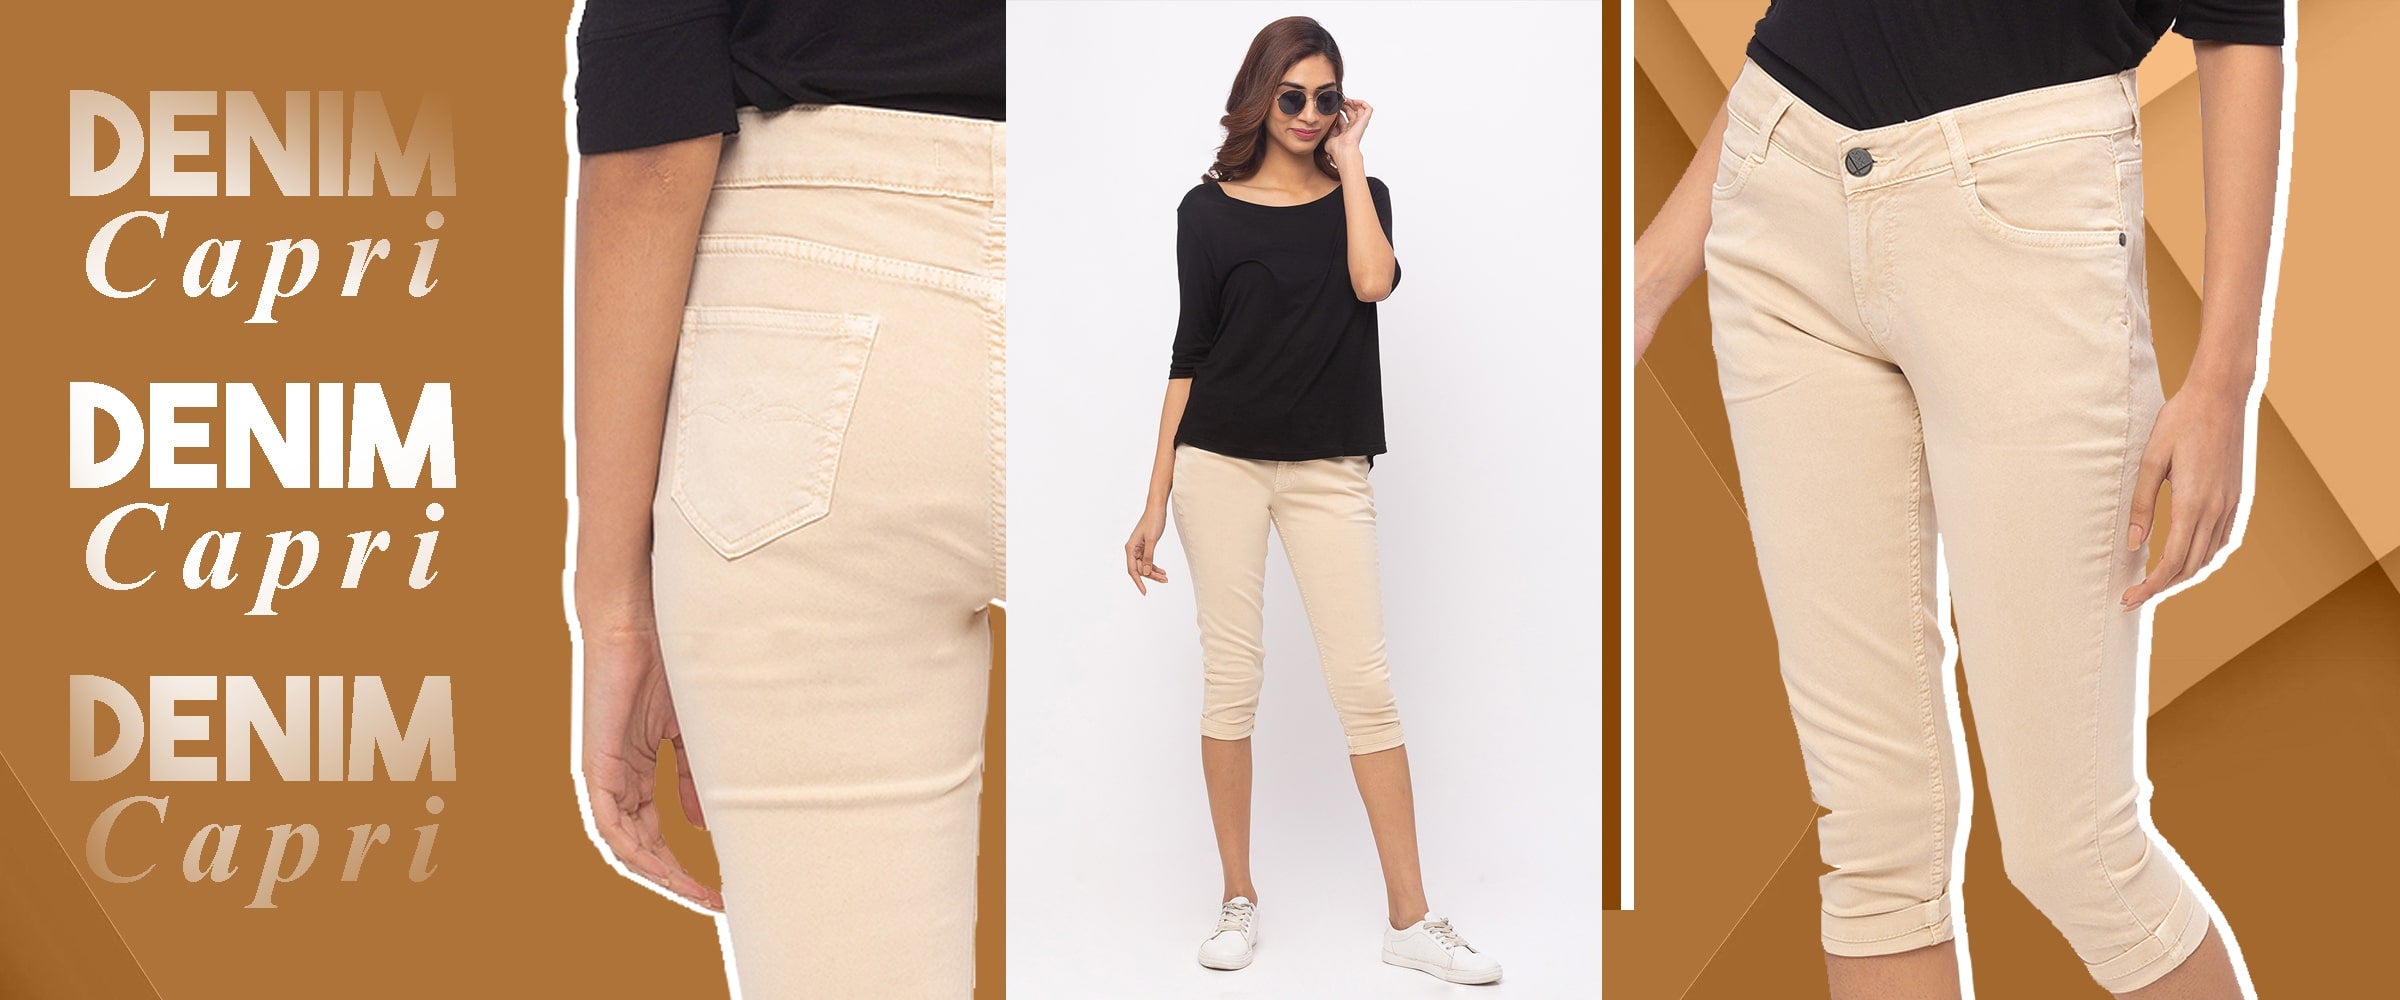 Ladies Fashion Trends For New Year: 7 Comfortable Capri Trousers